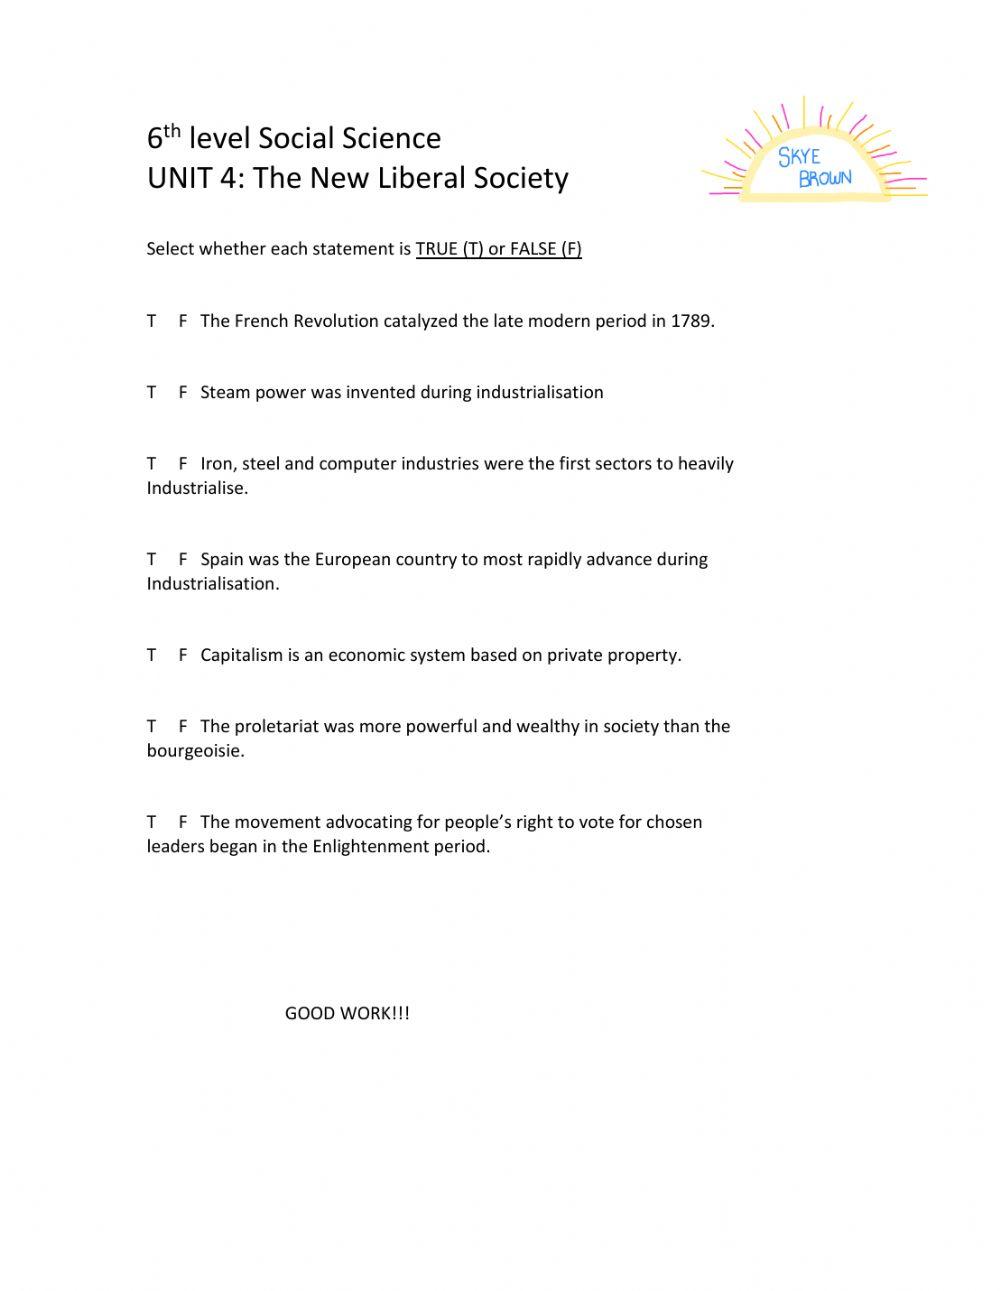 6th Level Social Science Unit 4: The New Liberal Society